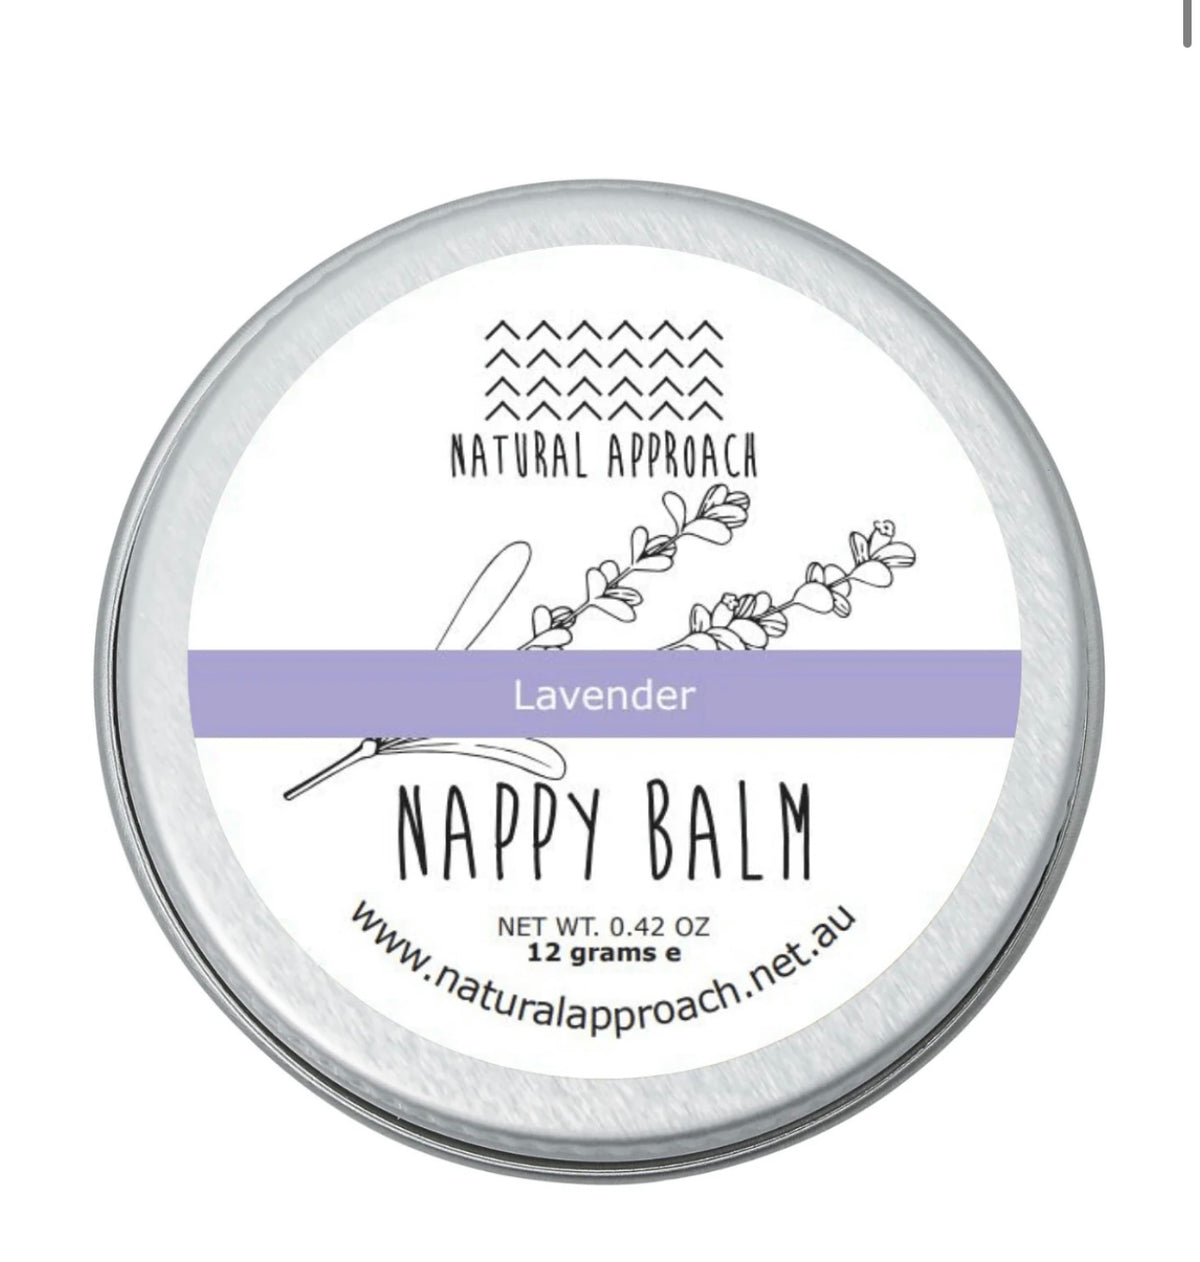 Natural Approach - Natural Lavender Nappy Balm - 12gms